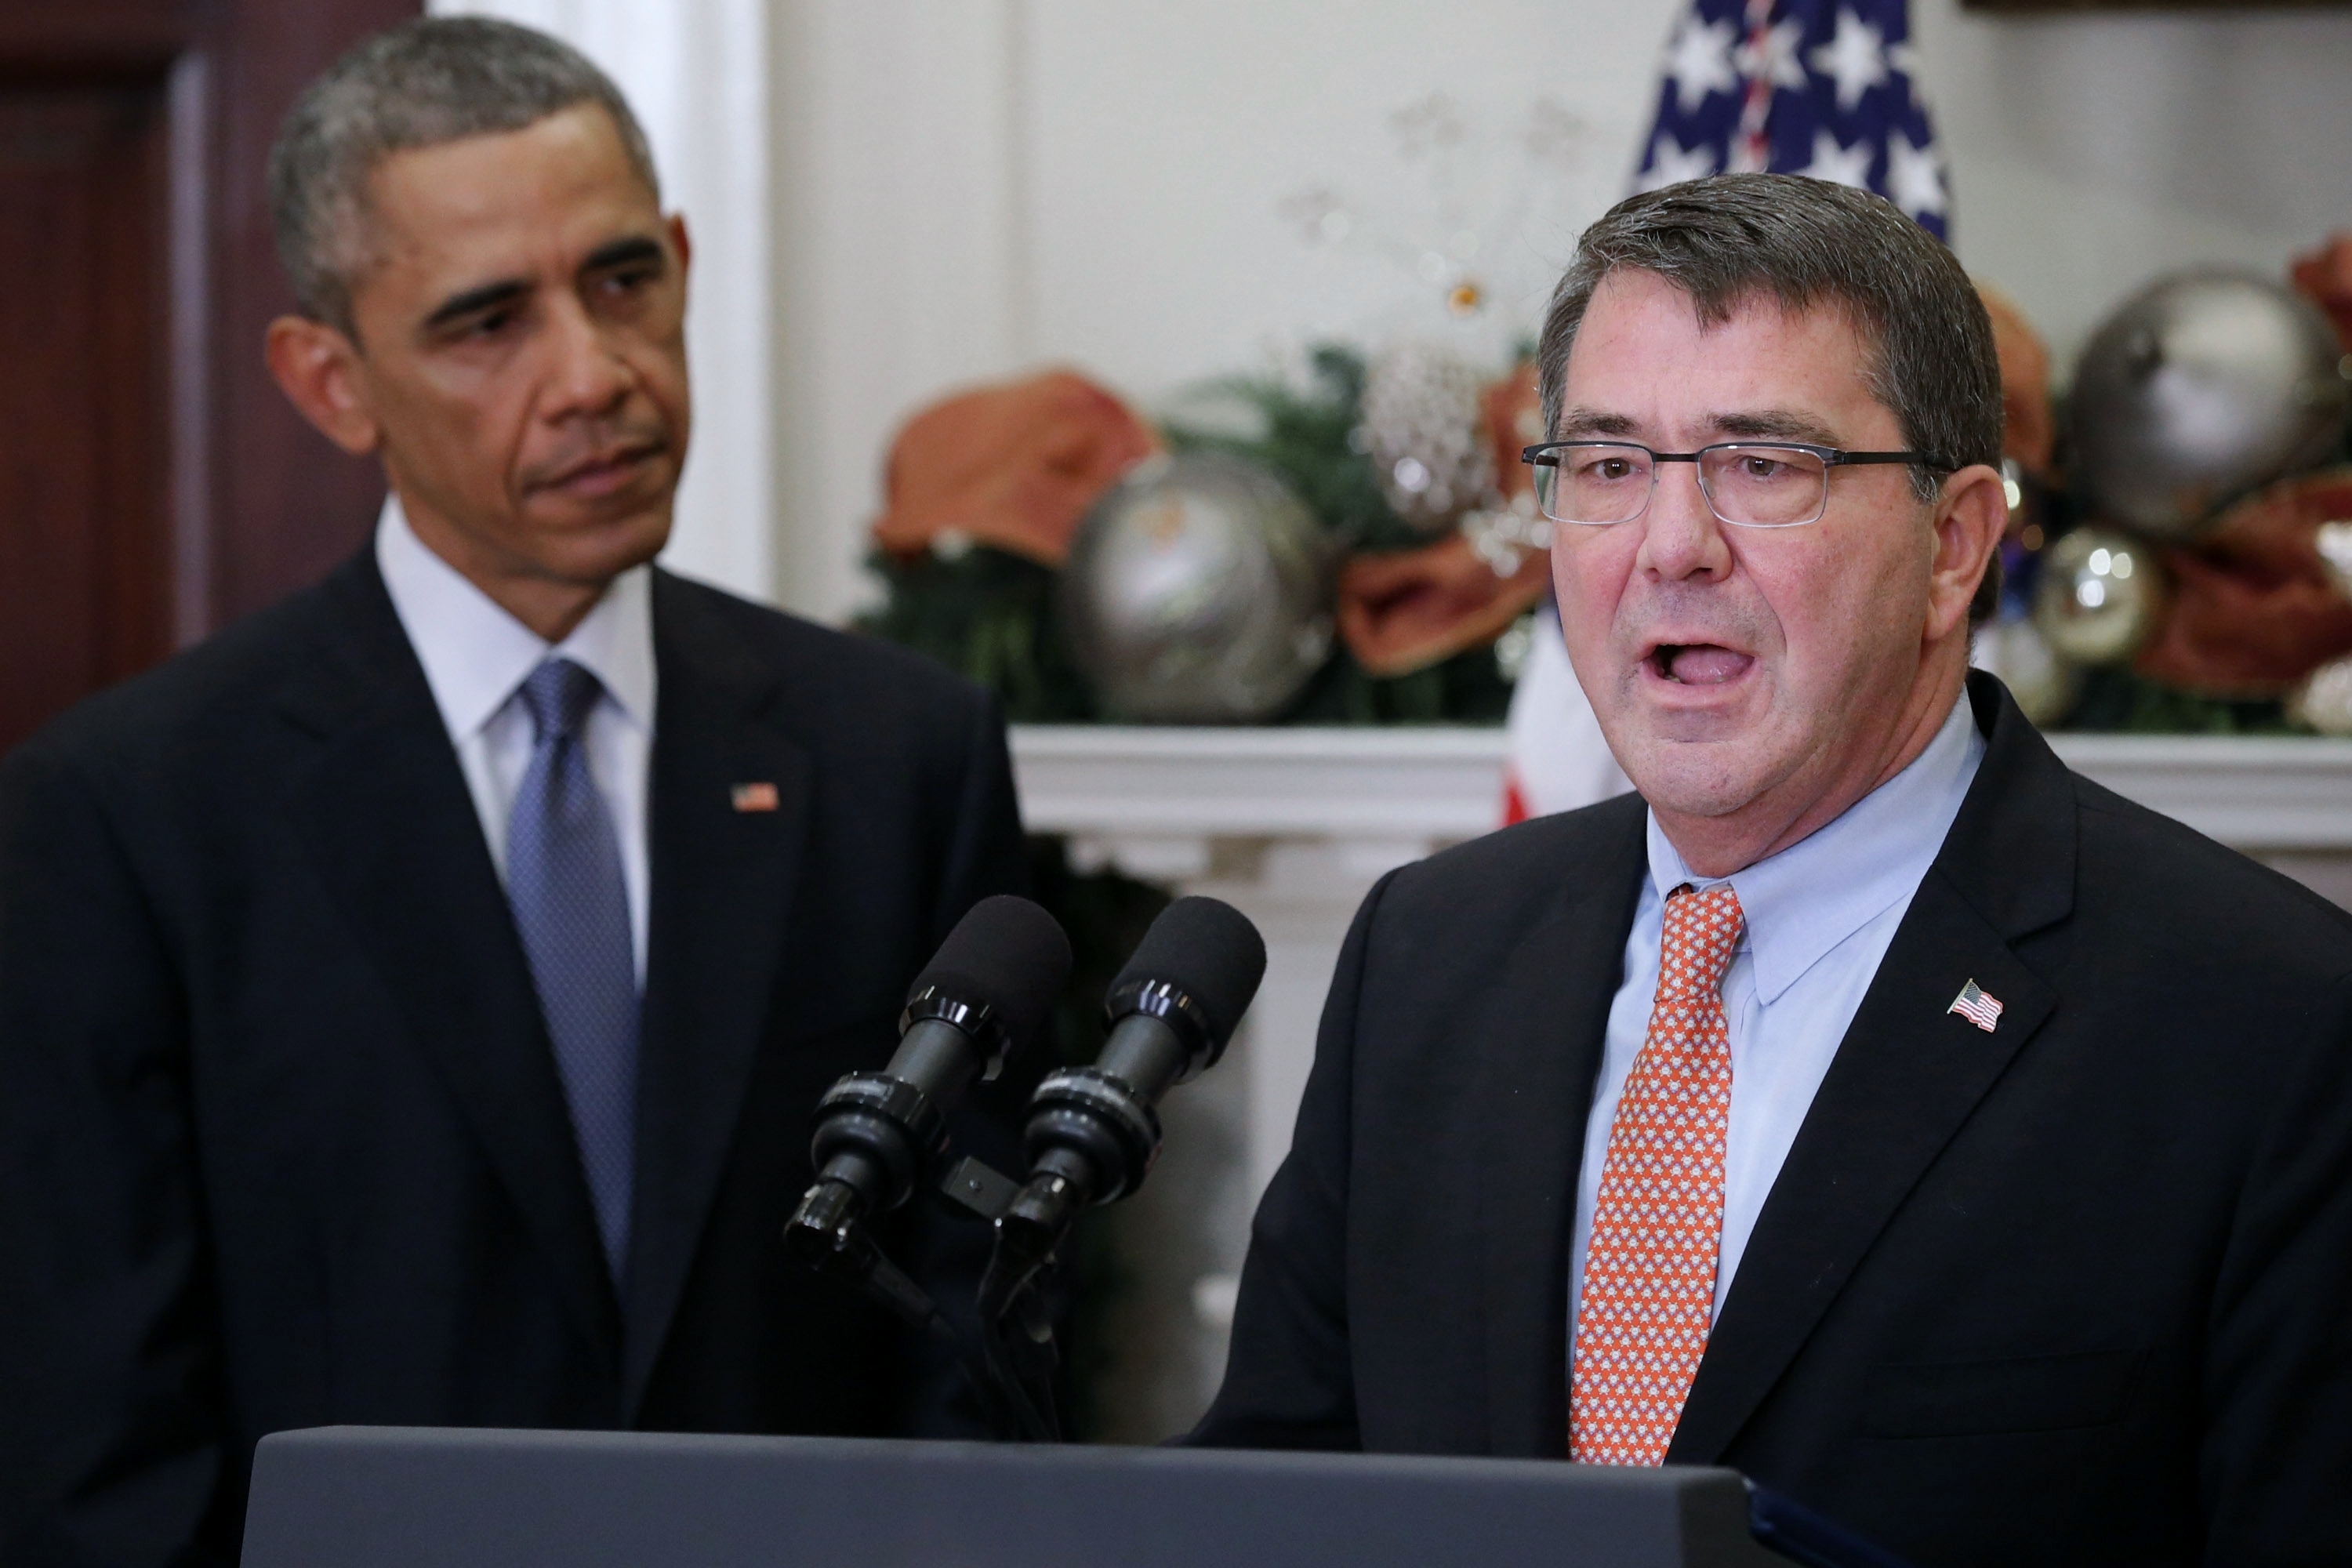 Ashton Carter, at podium, delivering remarks in the White House after being nominated by President Obama to be the next defense secretary, Dec. 5, 2014. (Chip Somodevilla/Getty Images)